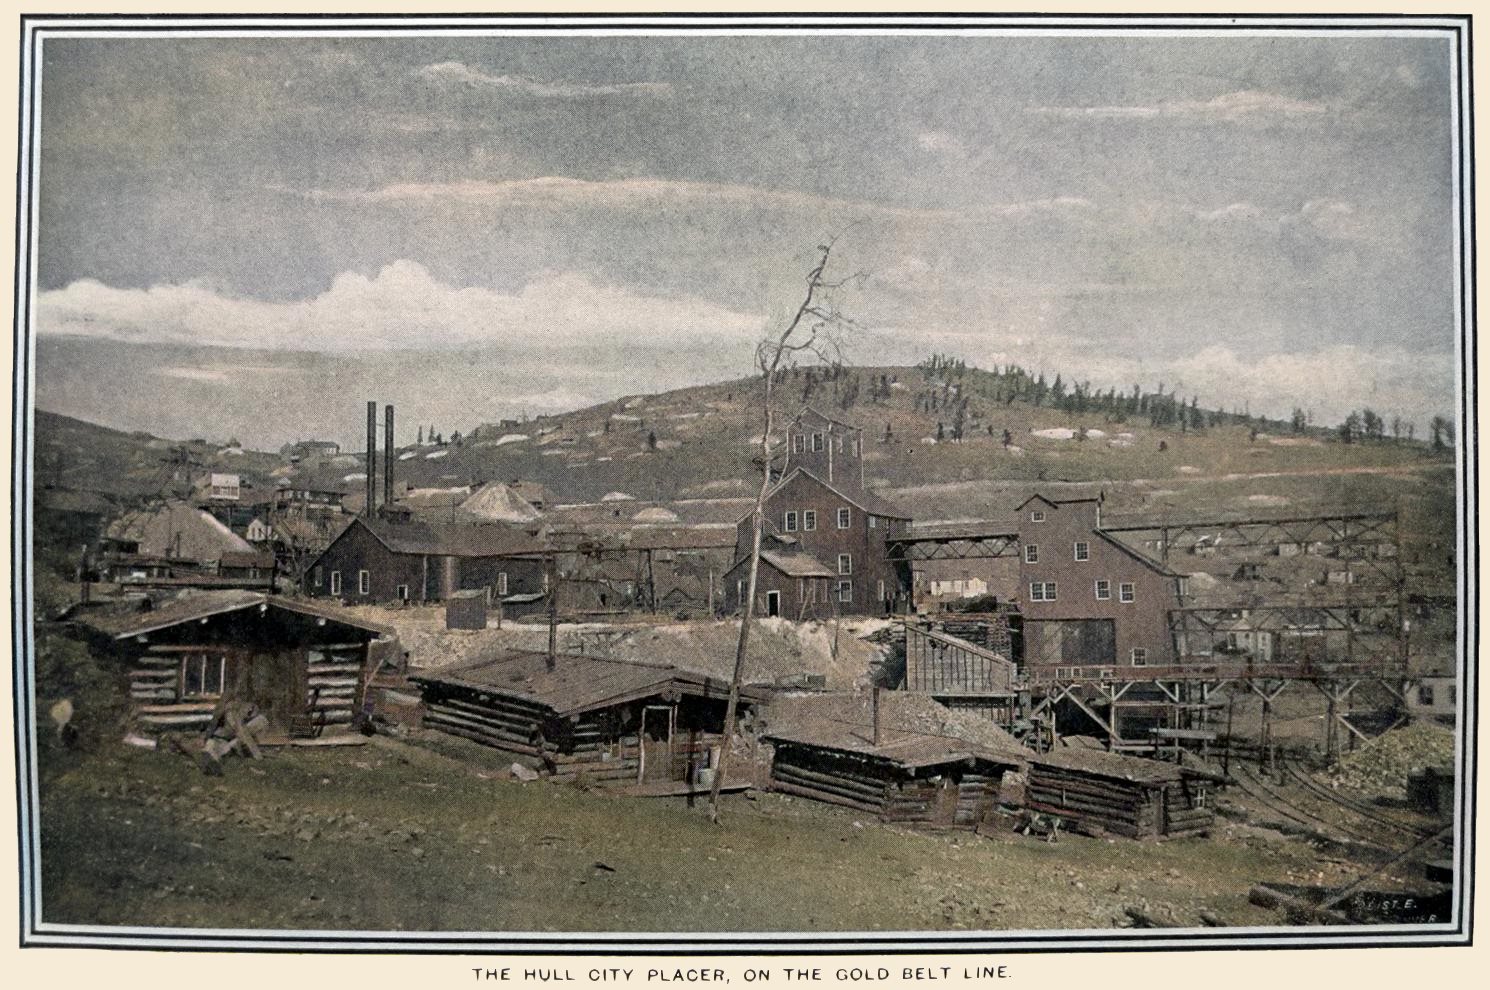 This quite nice scene of the exterior of the Hull City Mine is lovely as it is an early view showing what must been recently made huge surface structures of this mine operations. In the foreground are a small row od log cabins, four in view. Behind those are the Hull City mine and in background is the south side of Bull Cliff or east Bull Hill as I also seen it named as. To the lower right the tracks of the railroads serving this mine are seen, both the Golden Circle and the Midland Terminal served the ore-bins. Making one of those tracks dual gauged.
   I did procure the colored version of this image. Source was grayish, or in common speech black & white. Used an online service and tweaked and worked with image to get what looks best to my eyes at the moment.